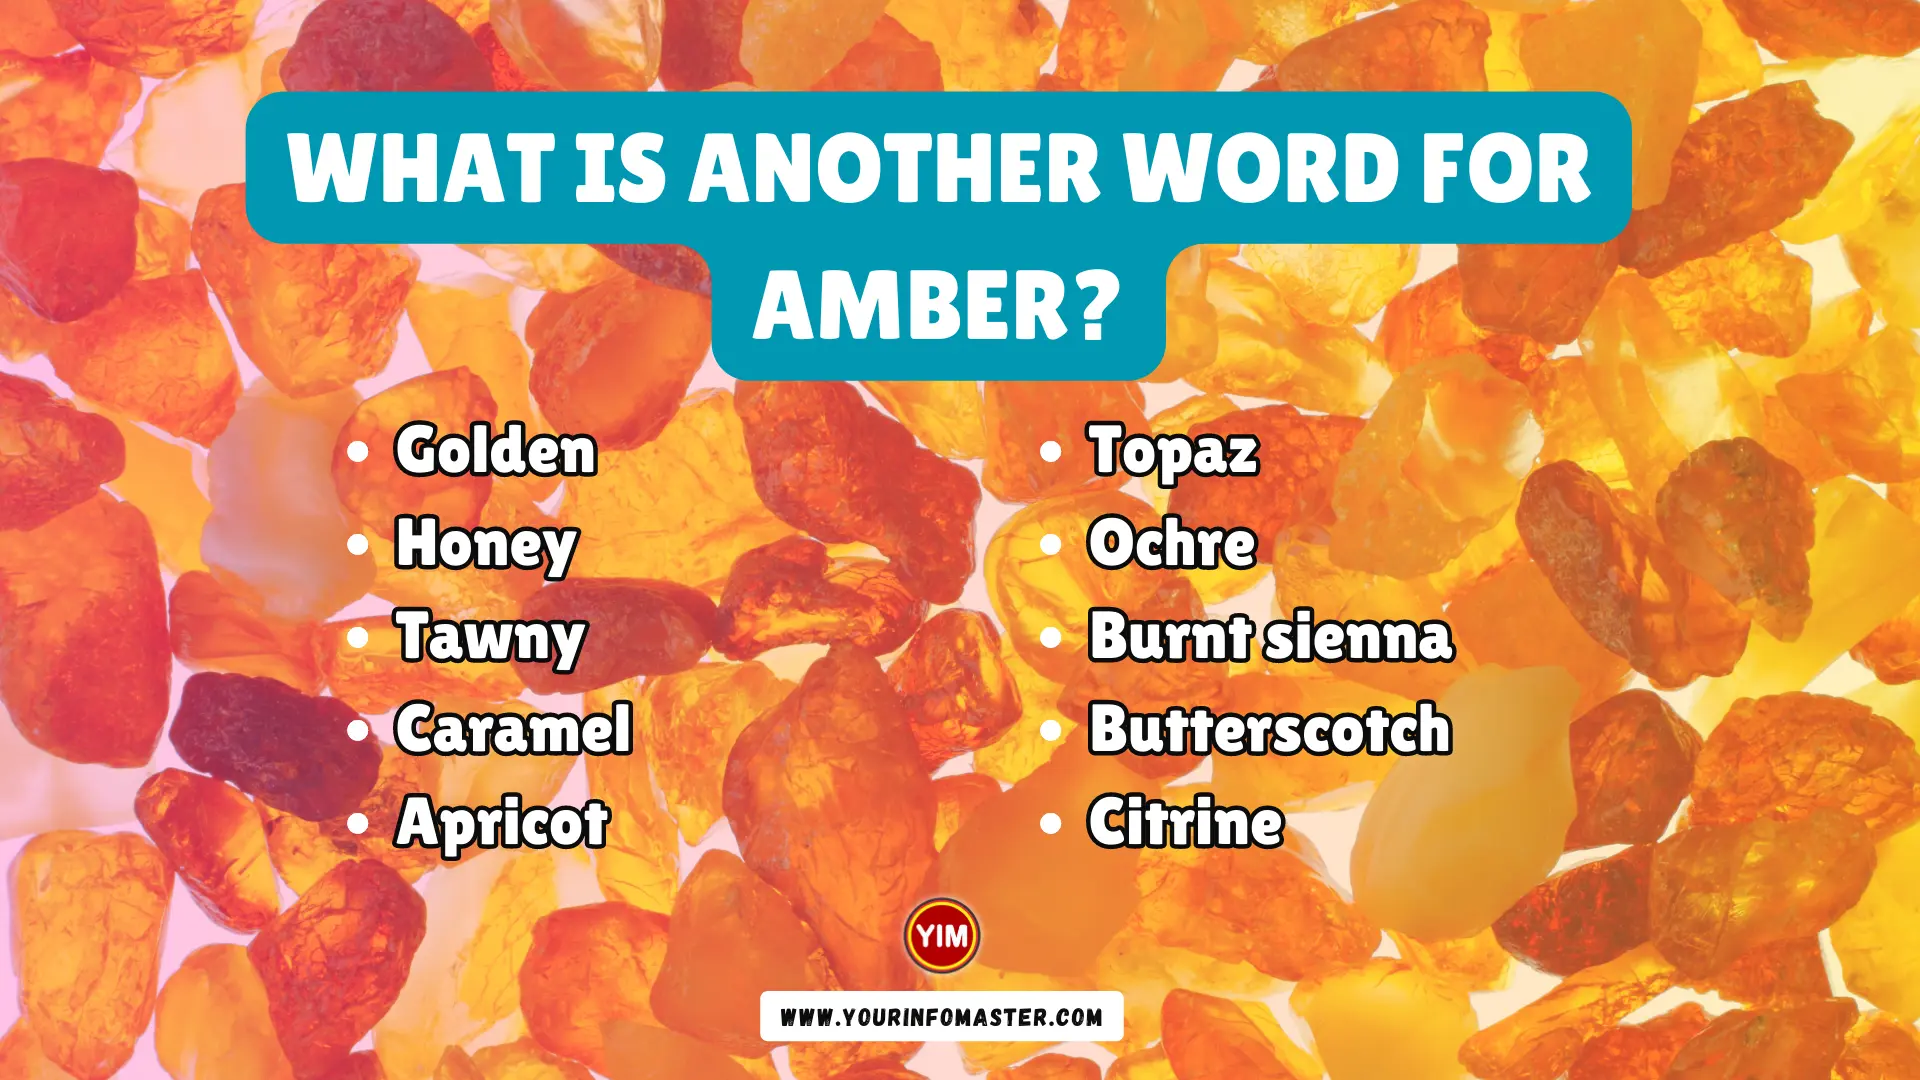 What is another word for Amber